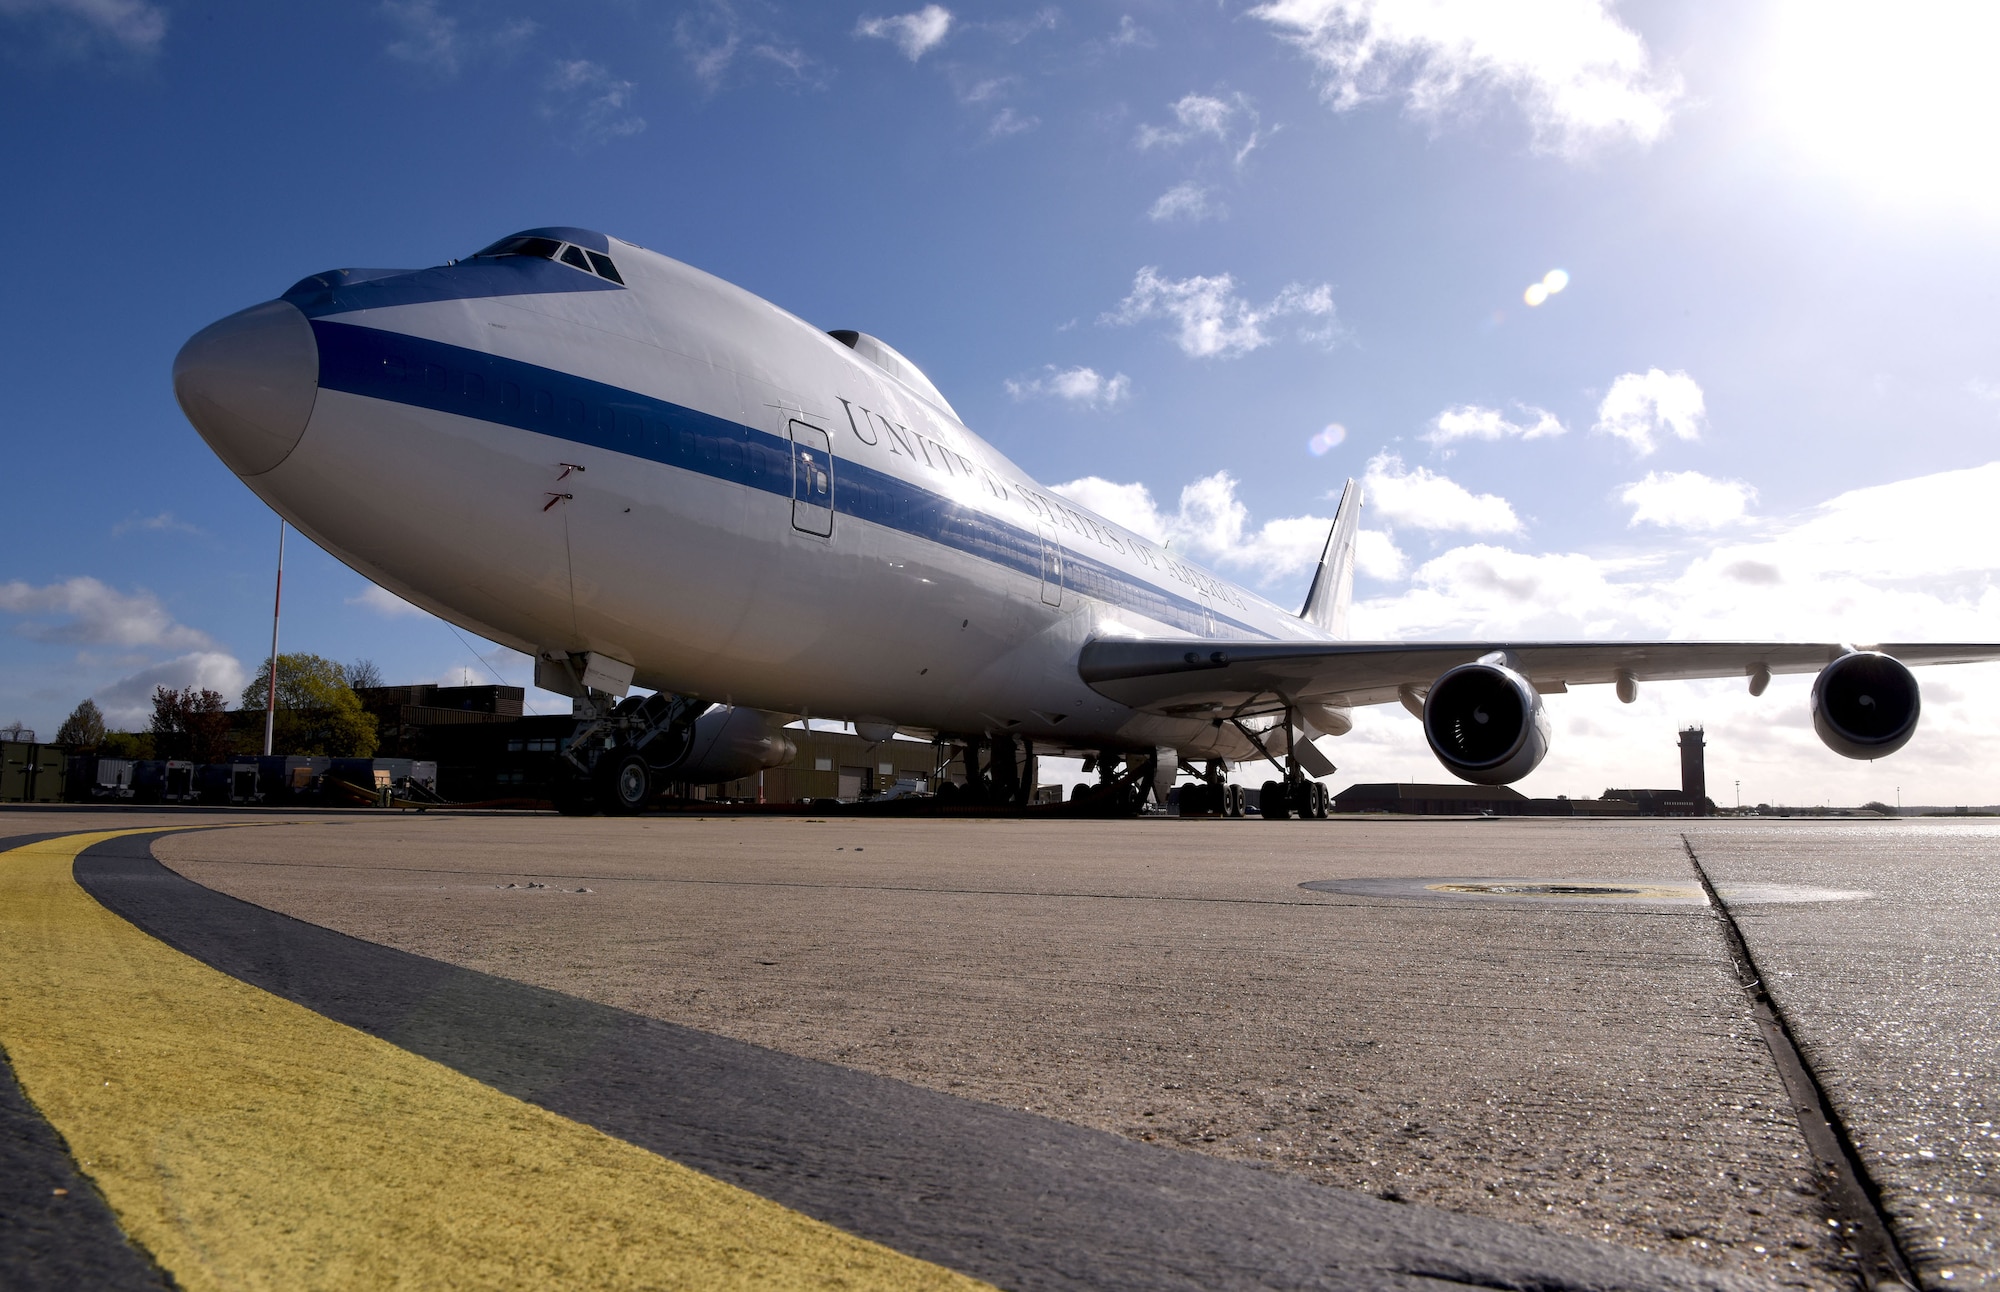 An E-4B National Airborne Operations Center stands ready at Royal Air Force Mildenhall, England, April 12, 2023. The NAOC aircraft has several missions, both operational and training, which require travel to a wide variety of locations, both within the United States and around the world. (U.S. Force photo by Karen Abeyasekere/This image has been altered for security purposes).